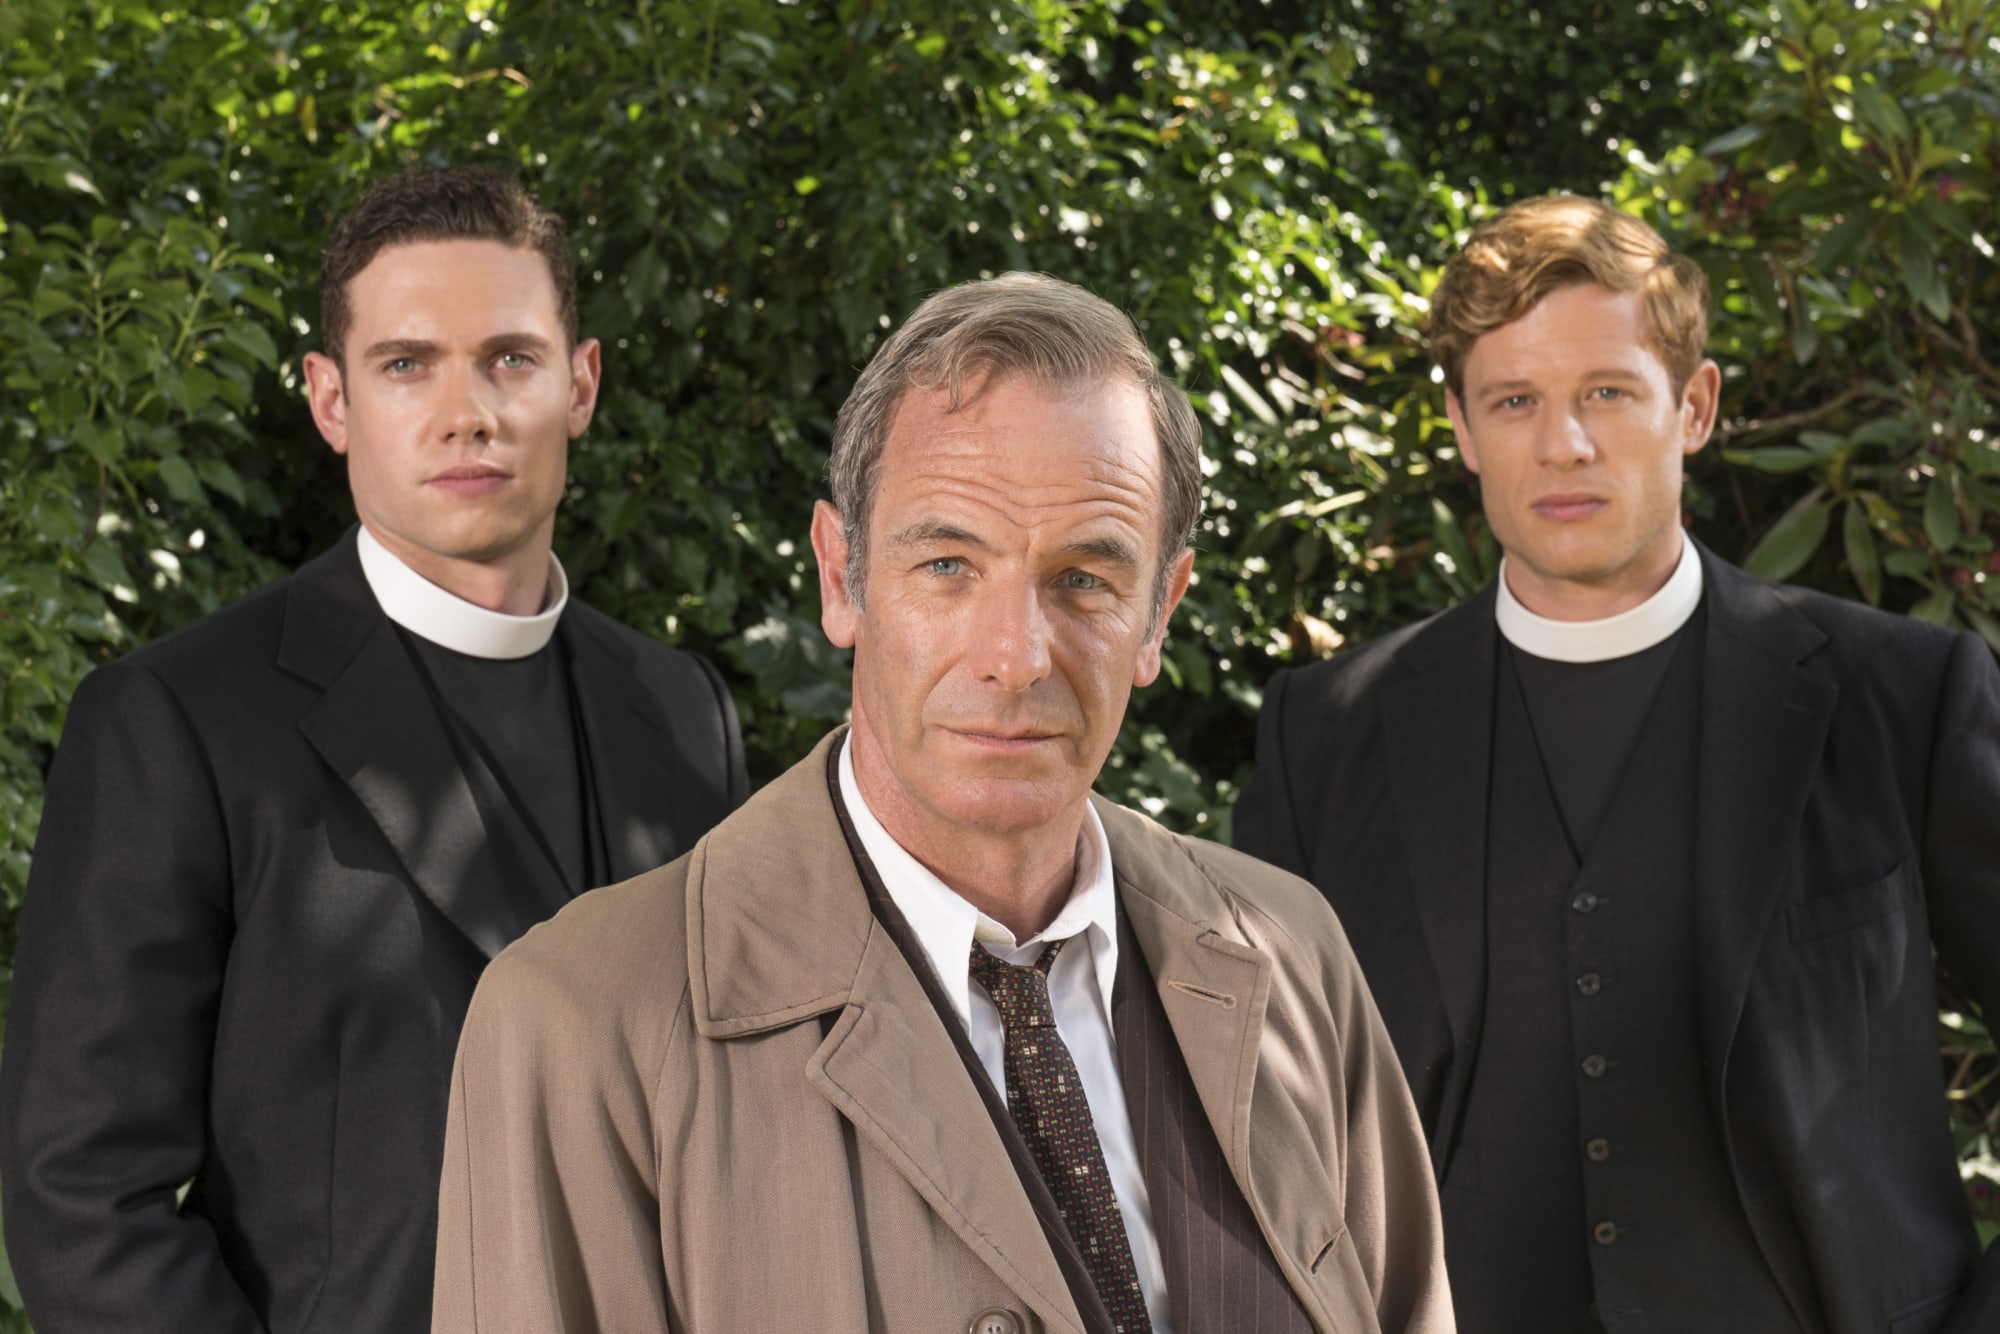 Grantchester Season 6 premiere date, cast, trailer, synopsis, and more